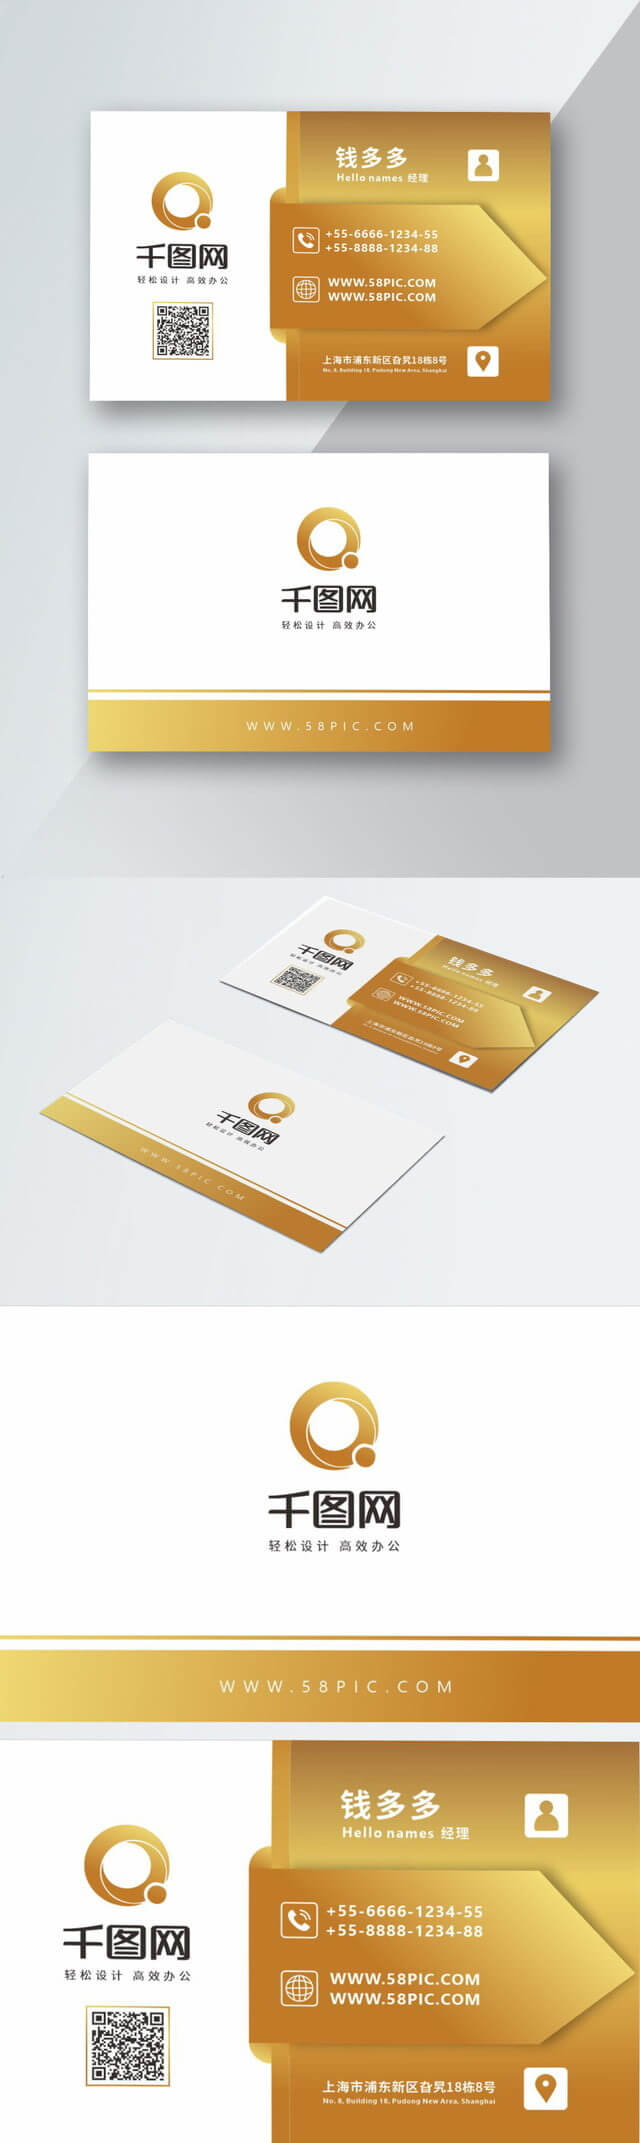 Hotel Business Card Vector Material Hotel Business Card Throughout Visiting Card Templates Download